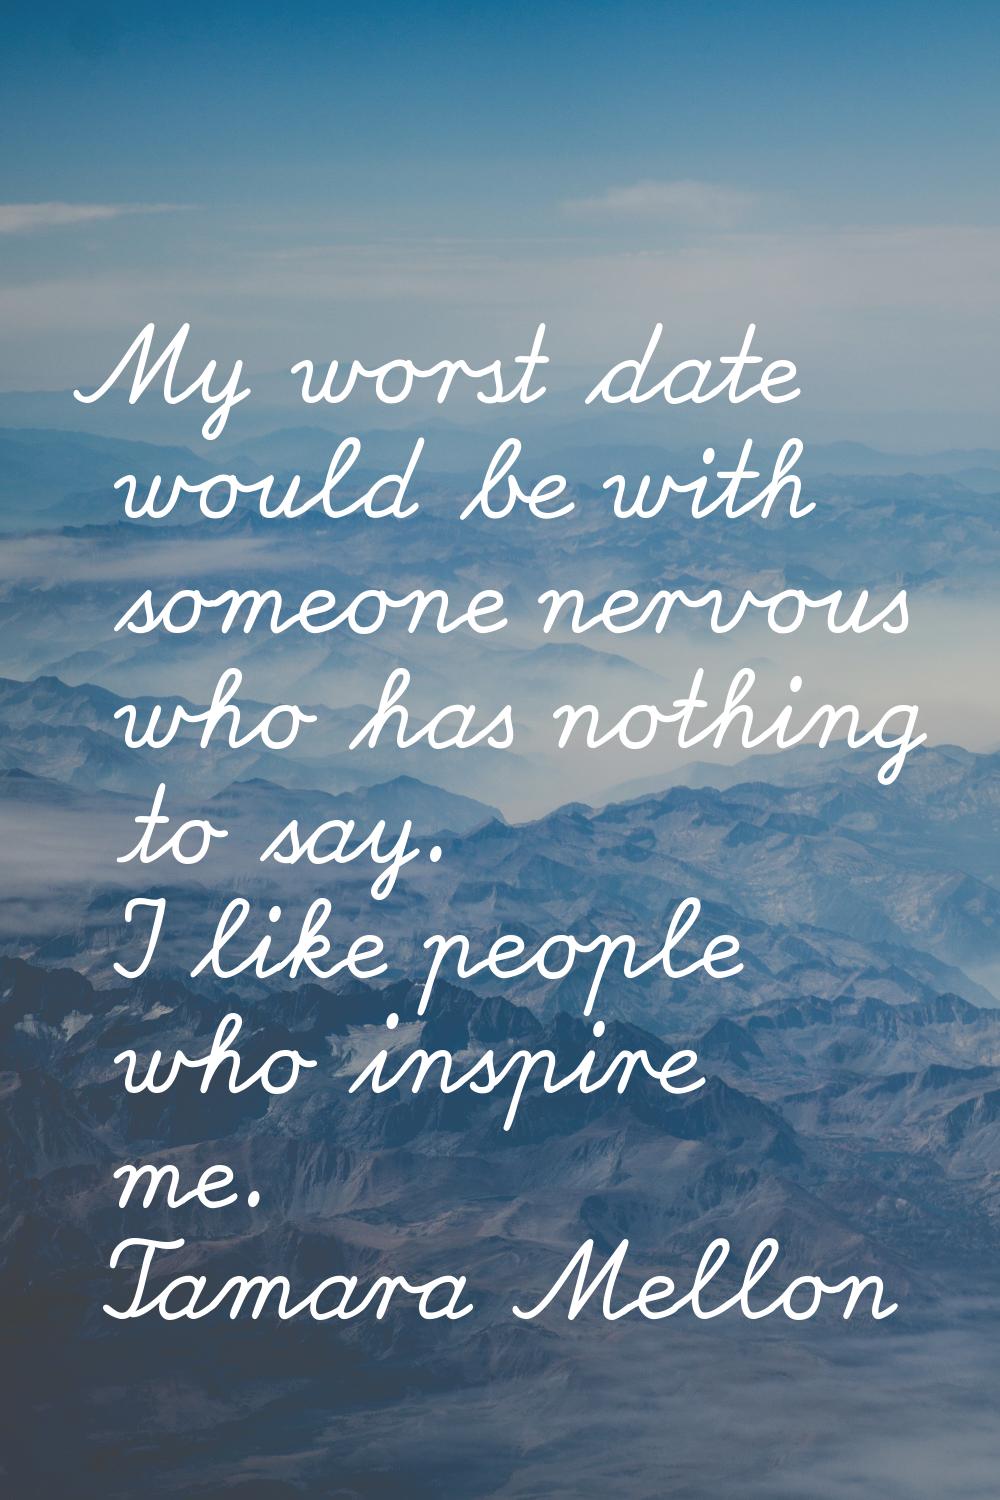 My worst date would be with someone nervous who has nothing to say. I like people who inspire me.